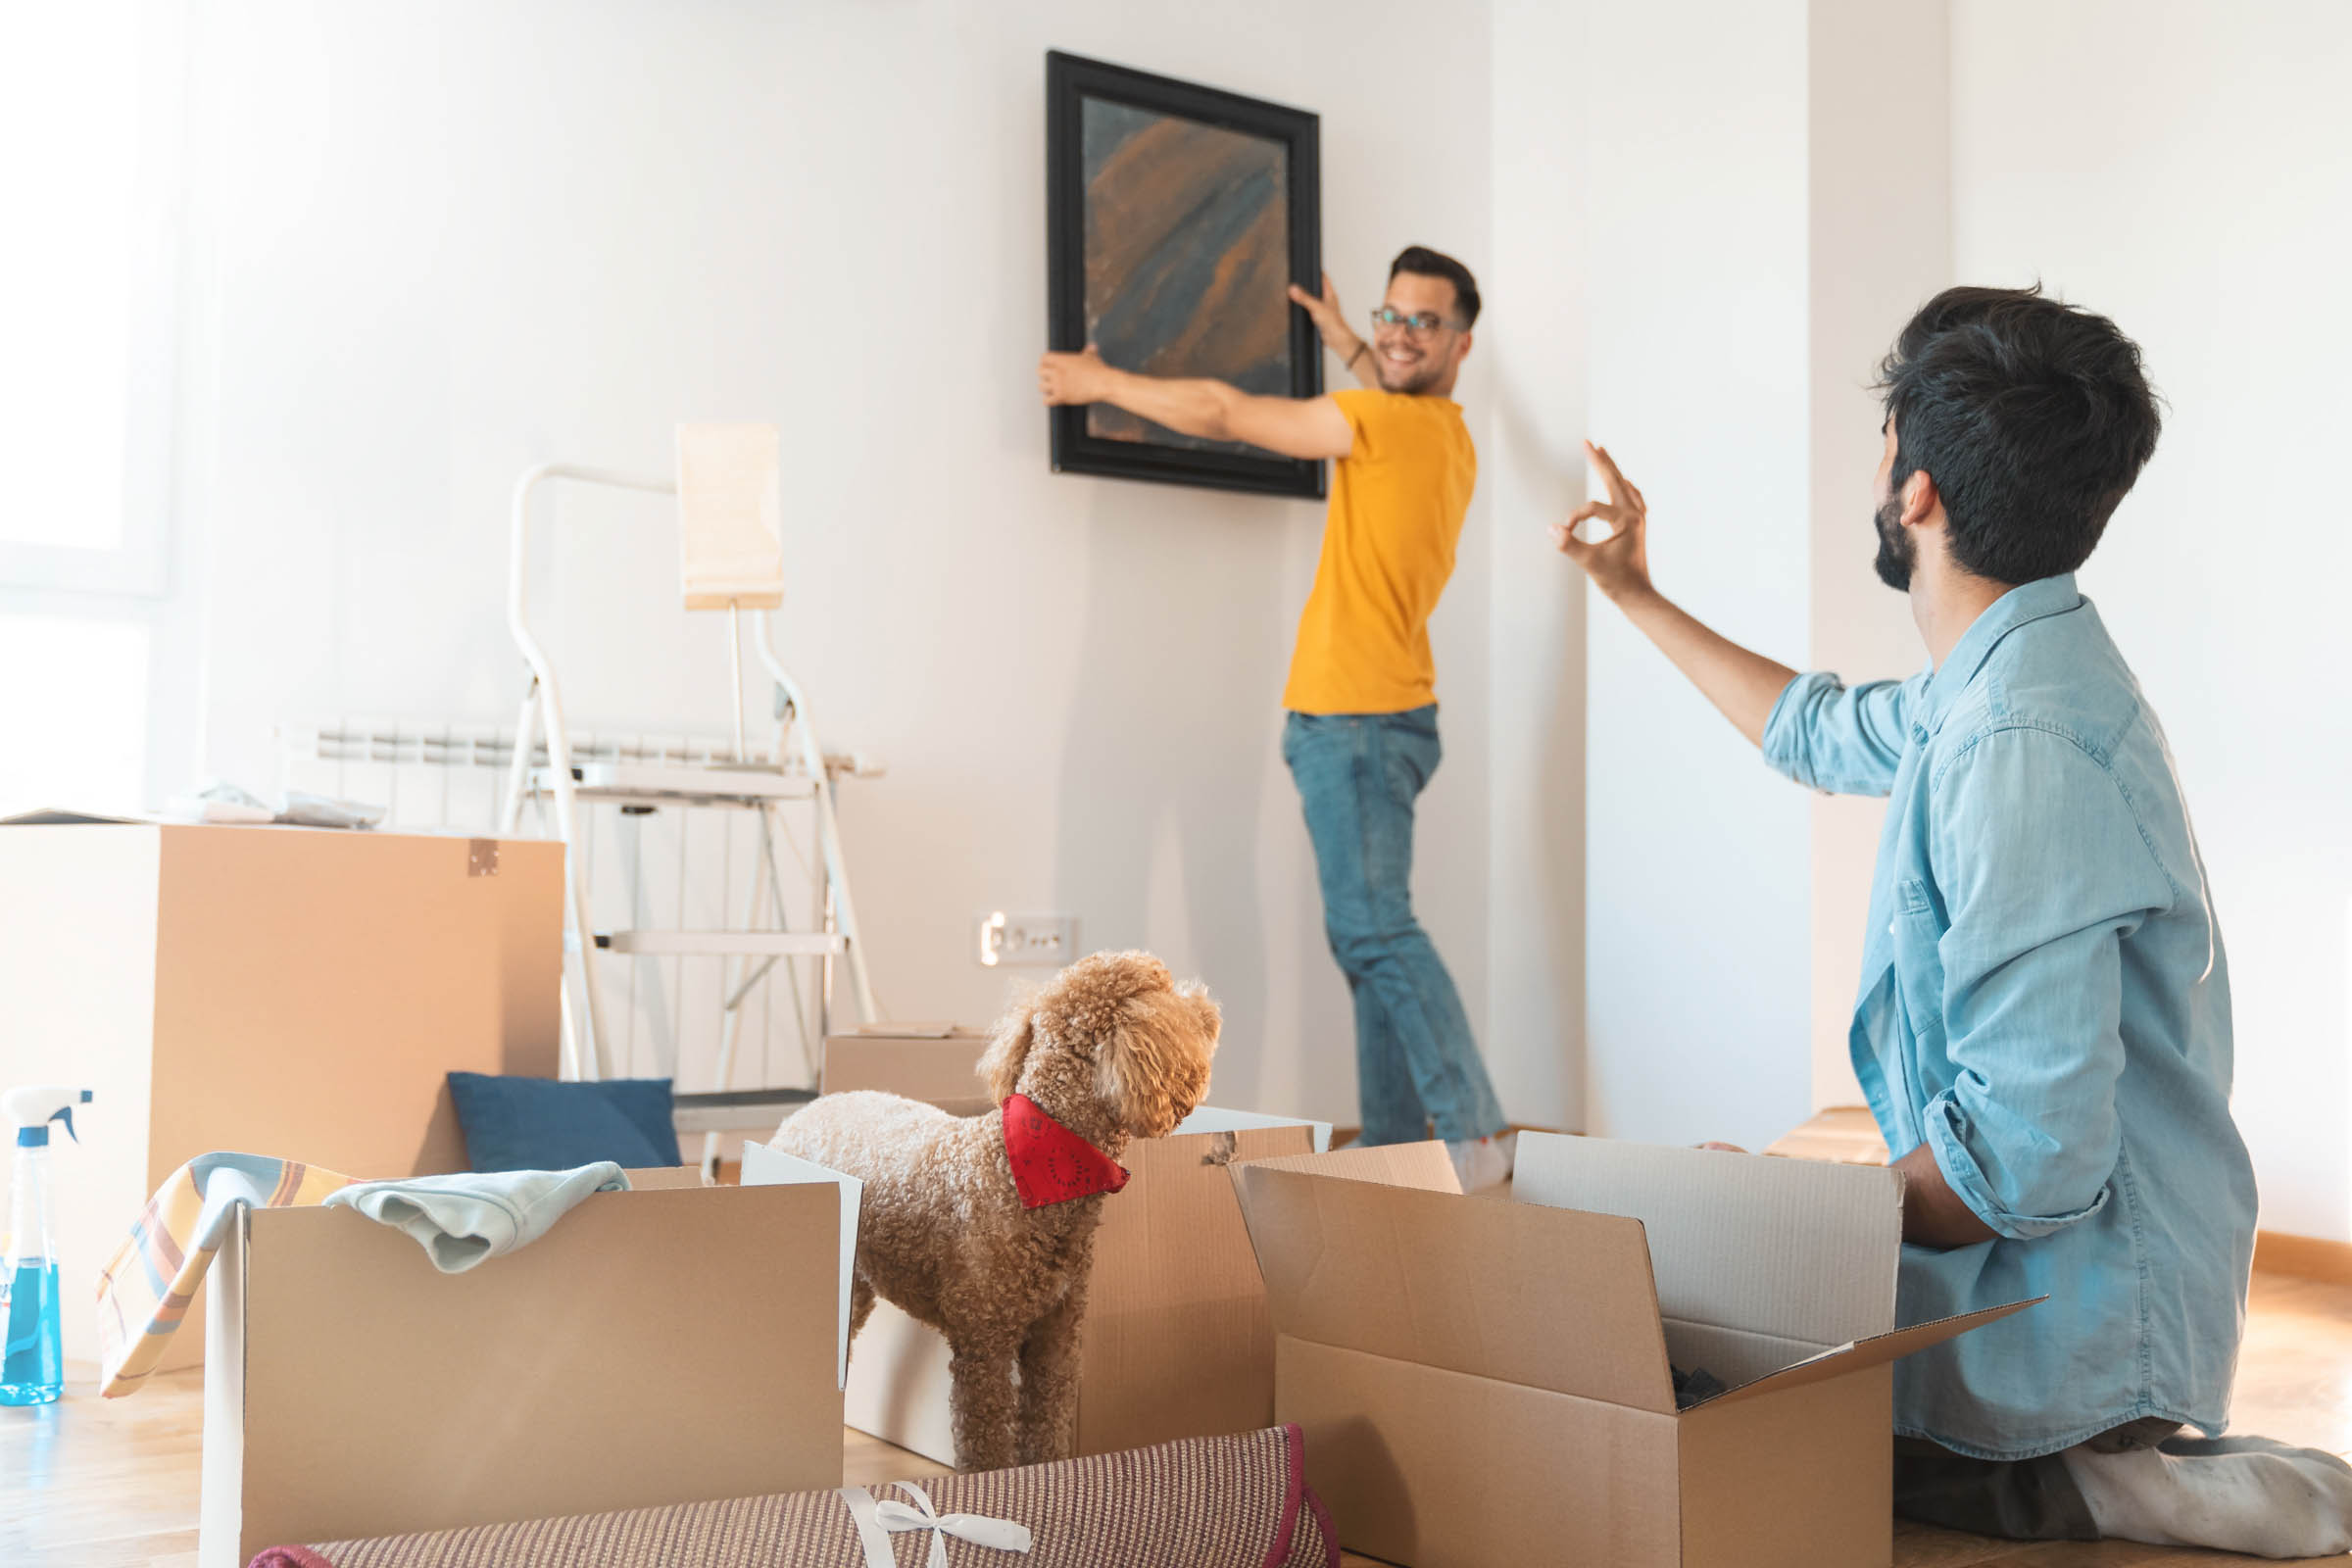 Two people unpacking boxes and hanging a painting in a bright, airy room with a dog wearing a red bandana, illustrating a new beginning with Indoor Air Quality in mind.